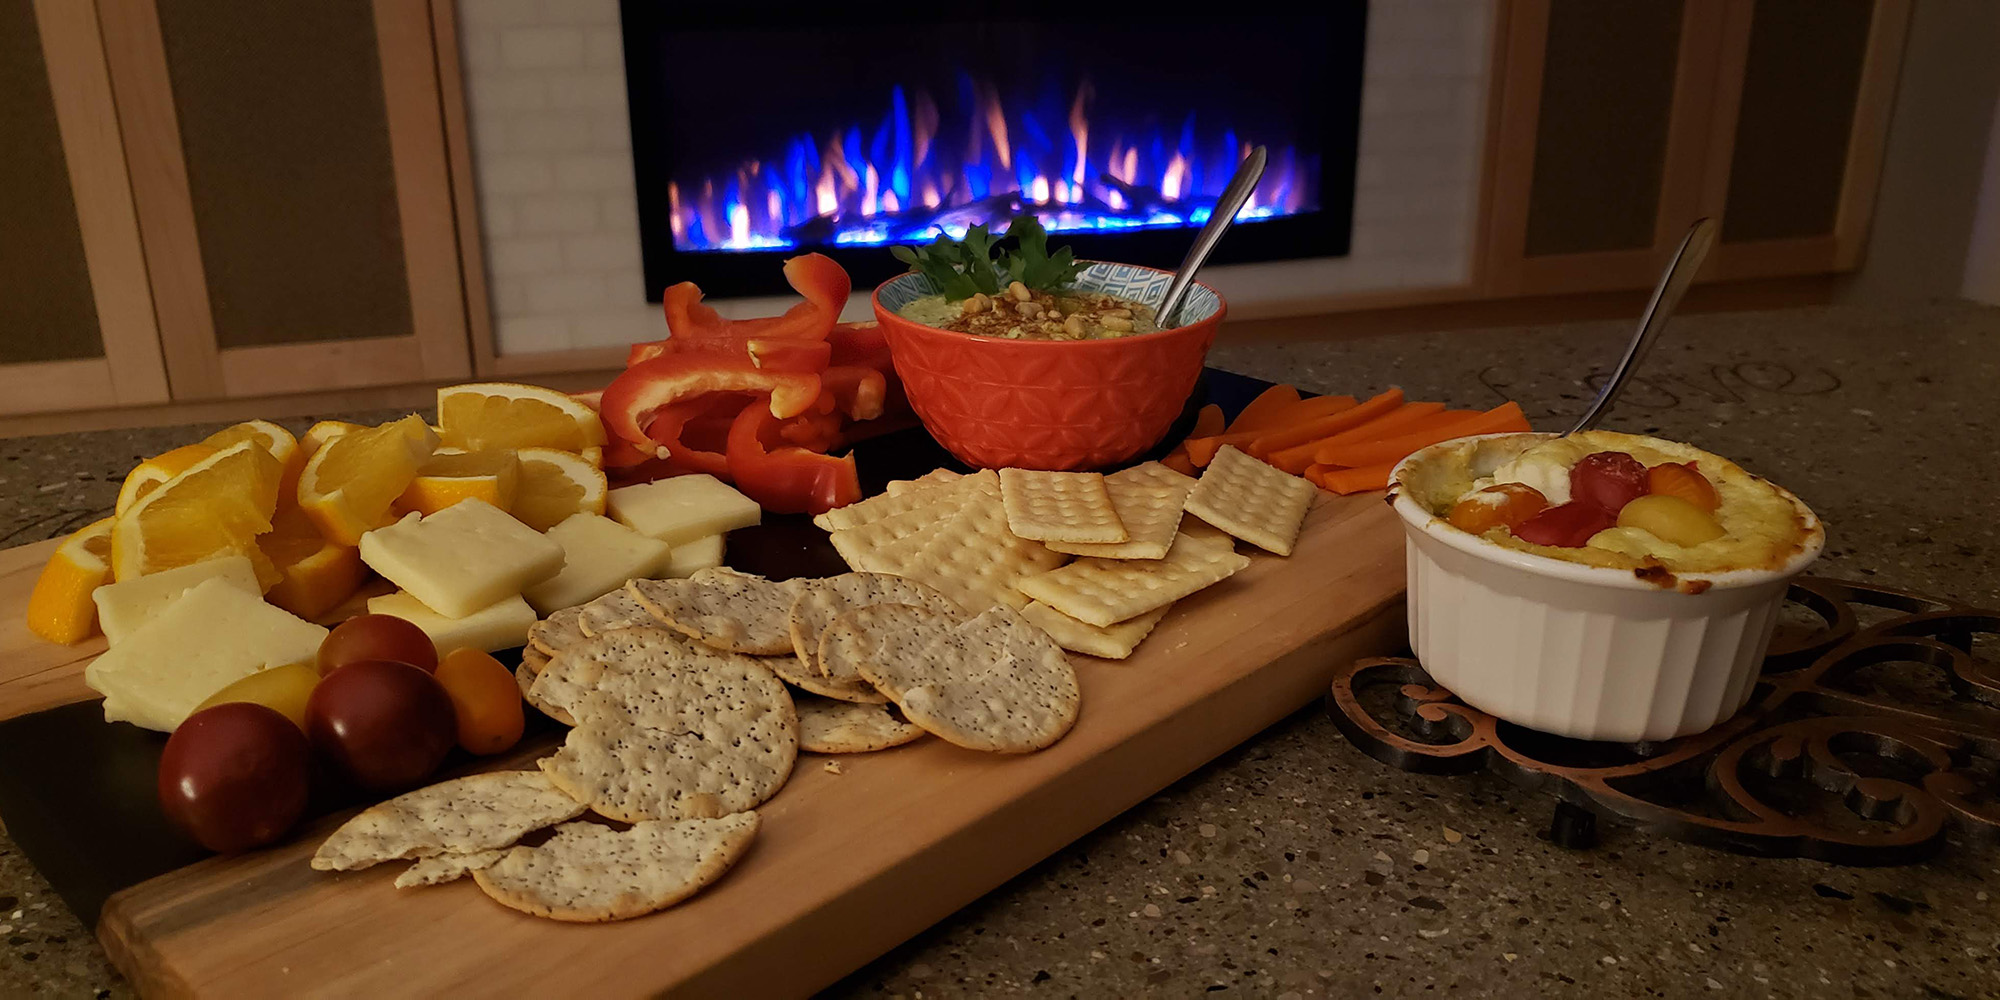 Charcuterie serving board viewed on concrete coffee table in front of fireplace in custom entertainment center